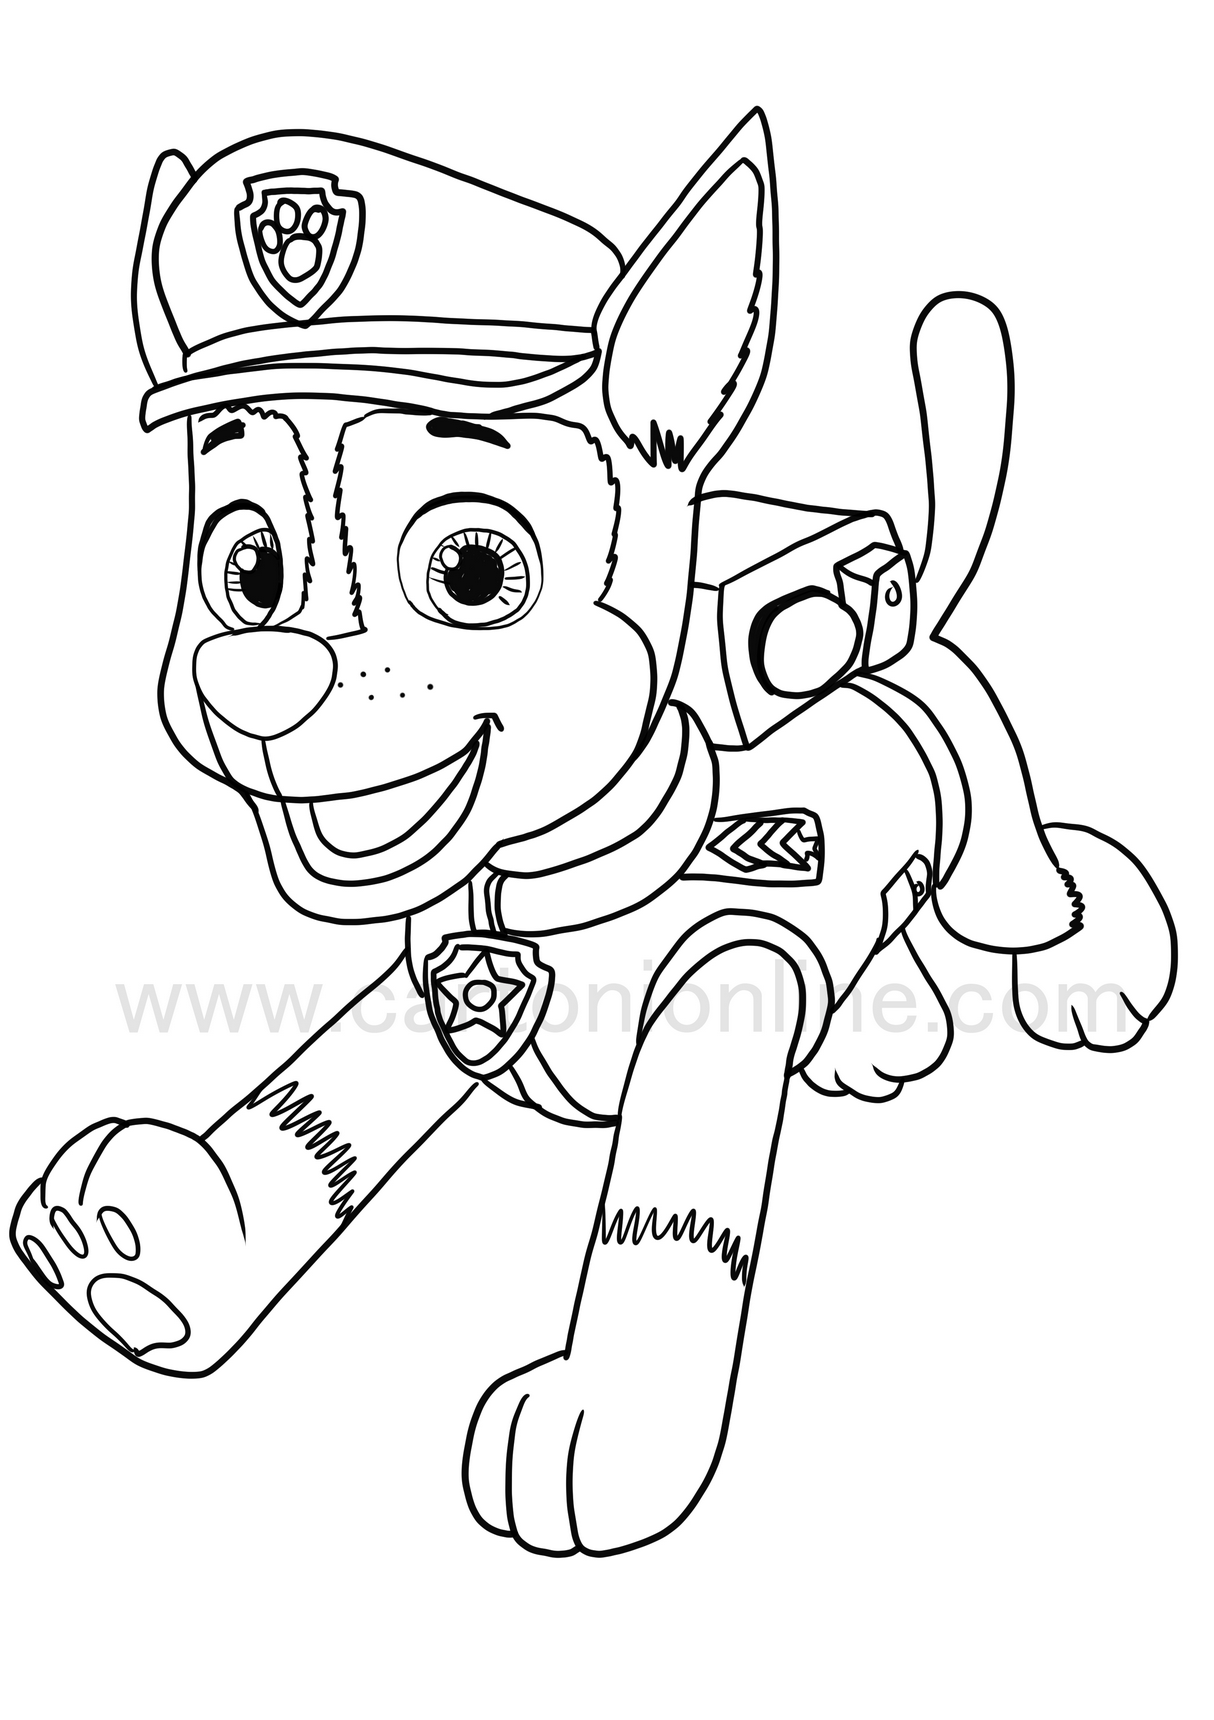 Coloring pages of Chase from Paw Patrol